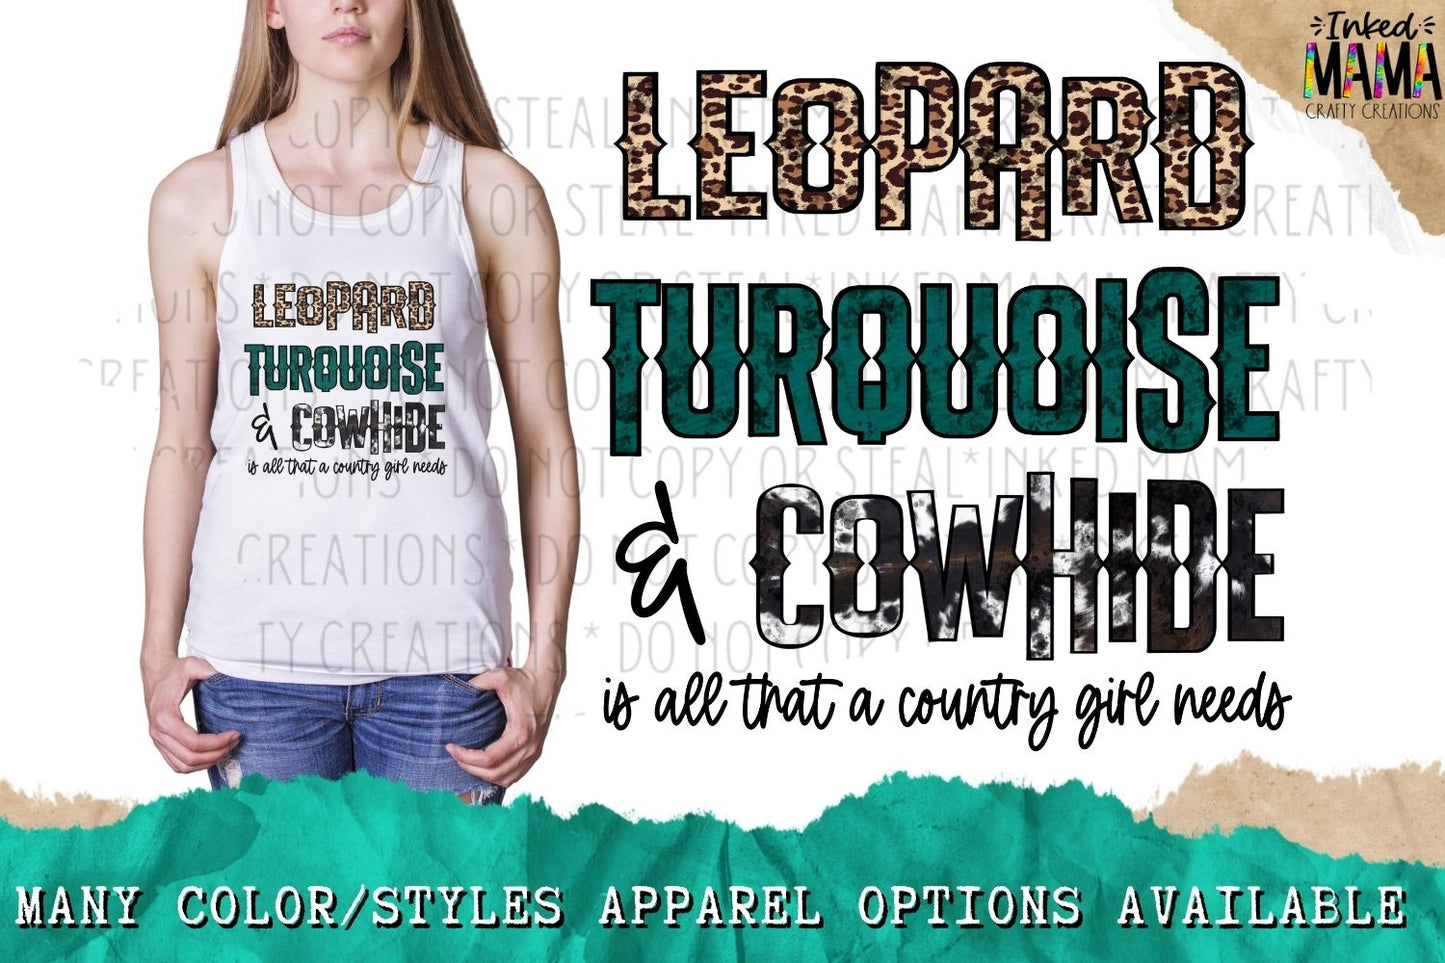 Leopard Turquoise & Cowhide. is all that a country girl needs -  Apparel